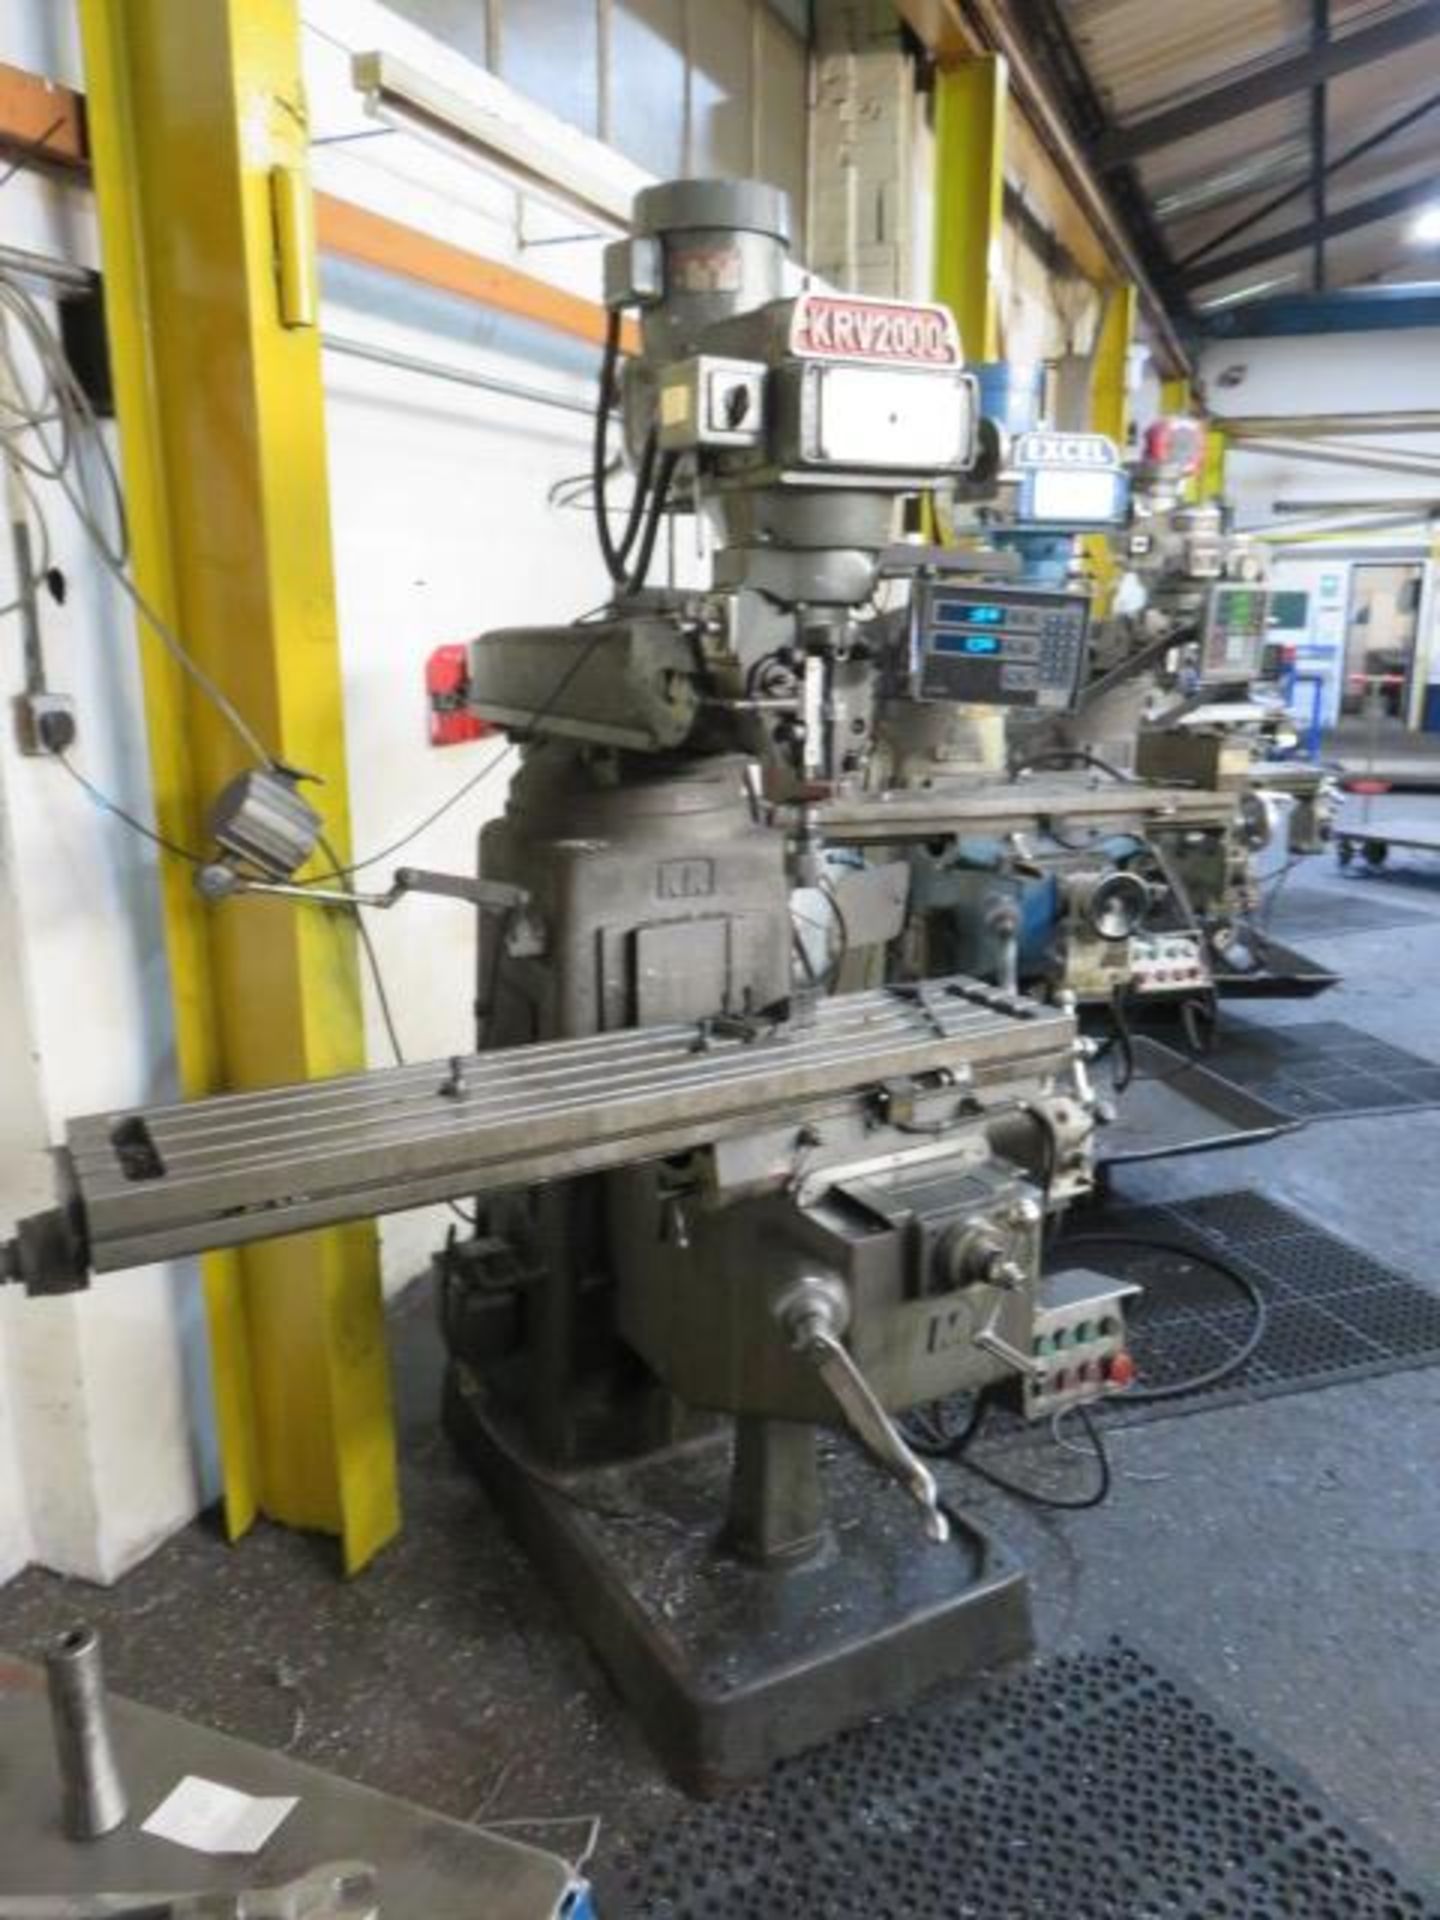 XYZ KRV V2000 Turret Milling Machine Complete With Acurite Controls Serial No. 7074 (Full RAMS Docu - Image 2 of 2